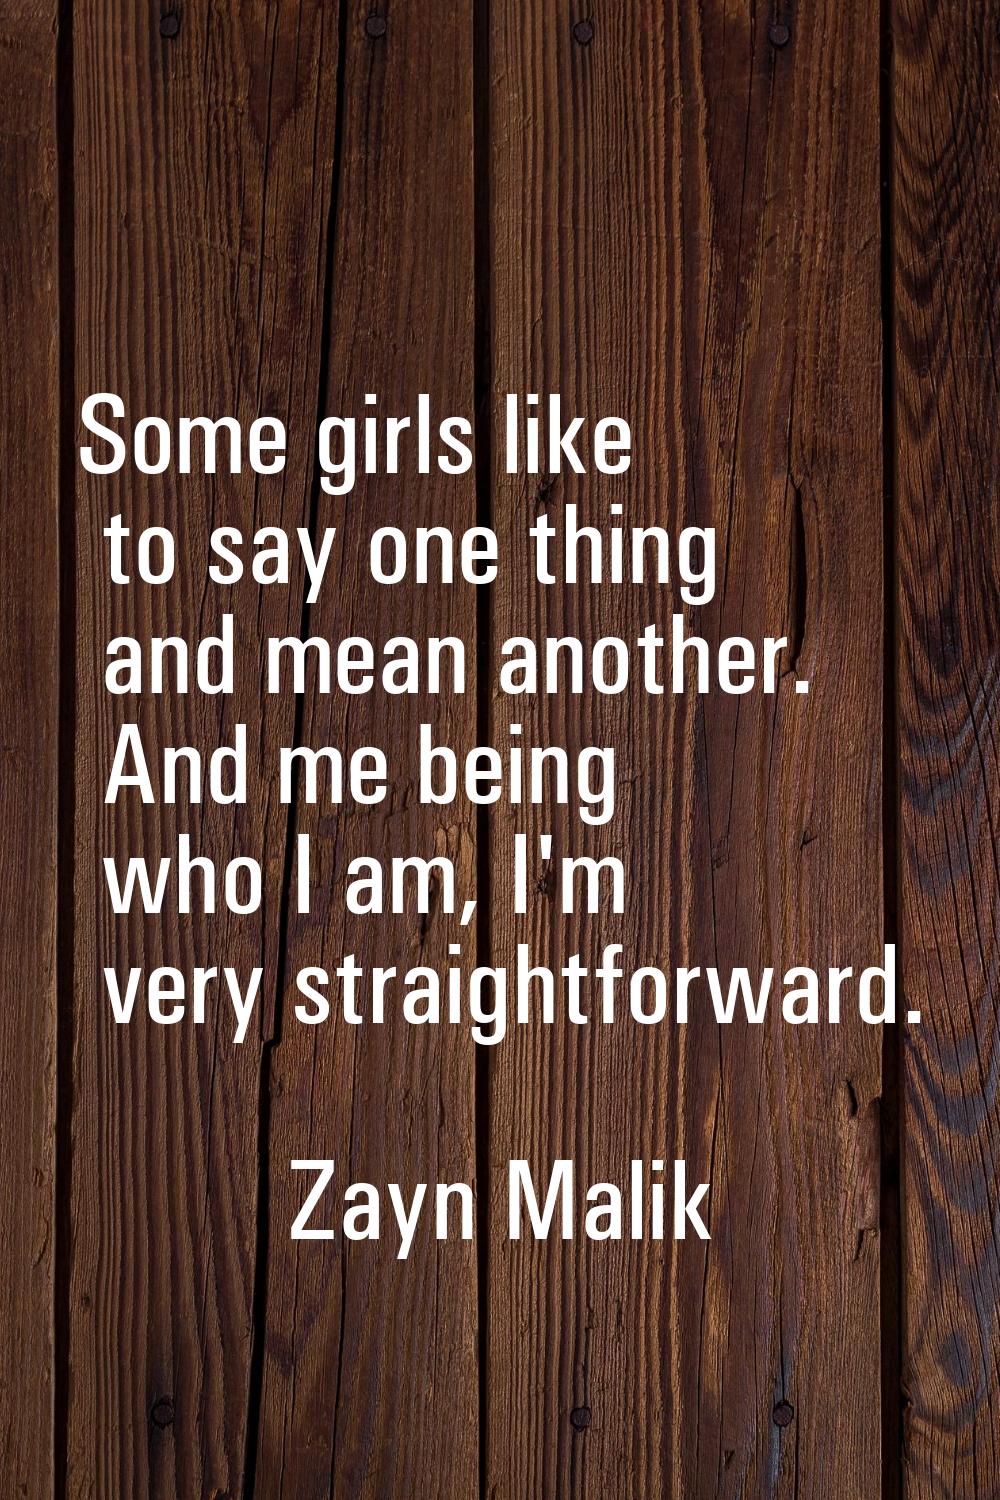 Some girls like to say one thing and mean another. And me being who I am, I'm very straightforward.